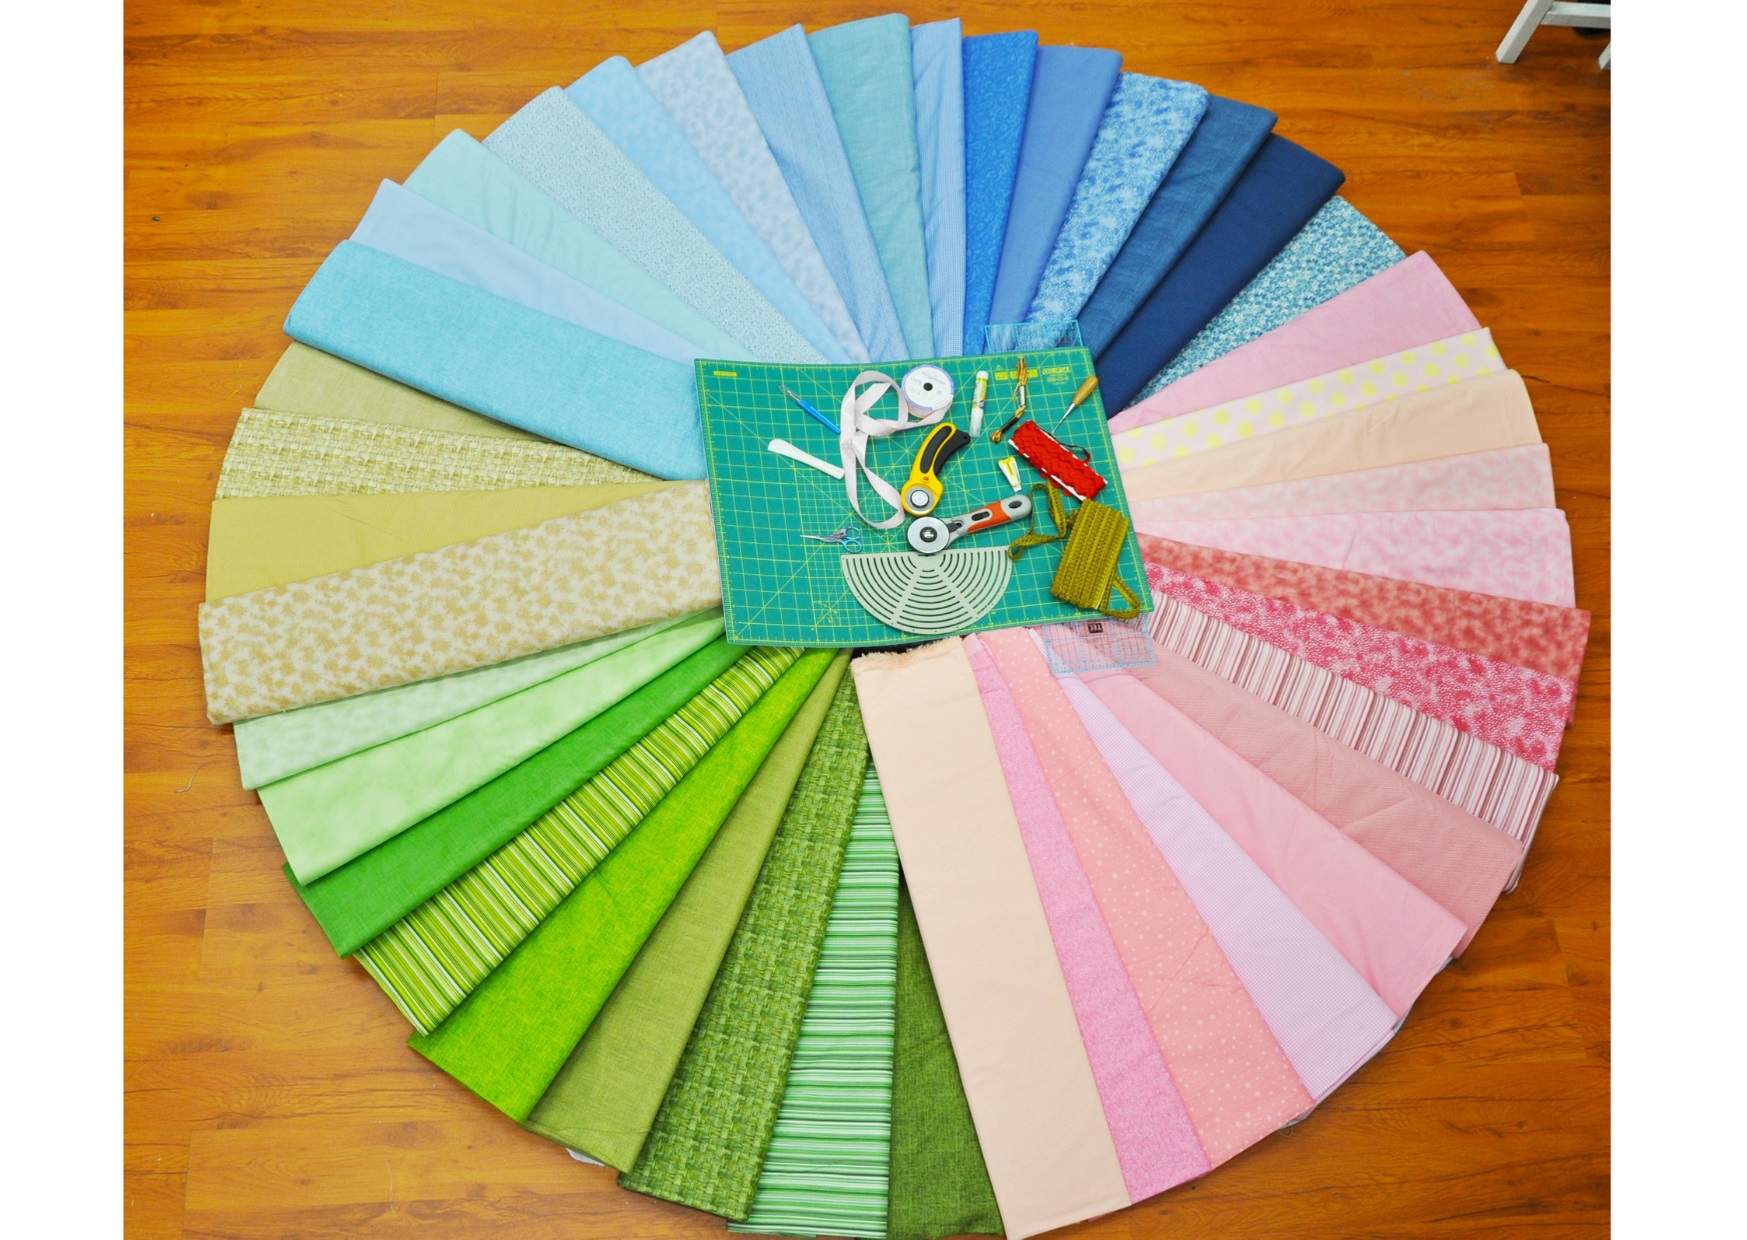 Colour wheel display of material pieces used for patchwork with sewing tools